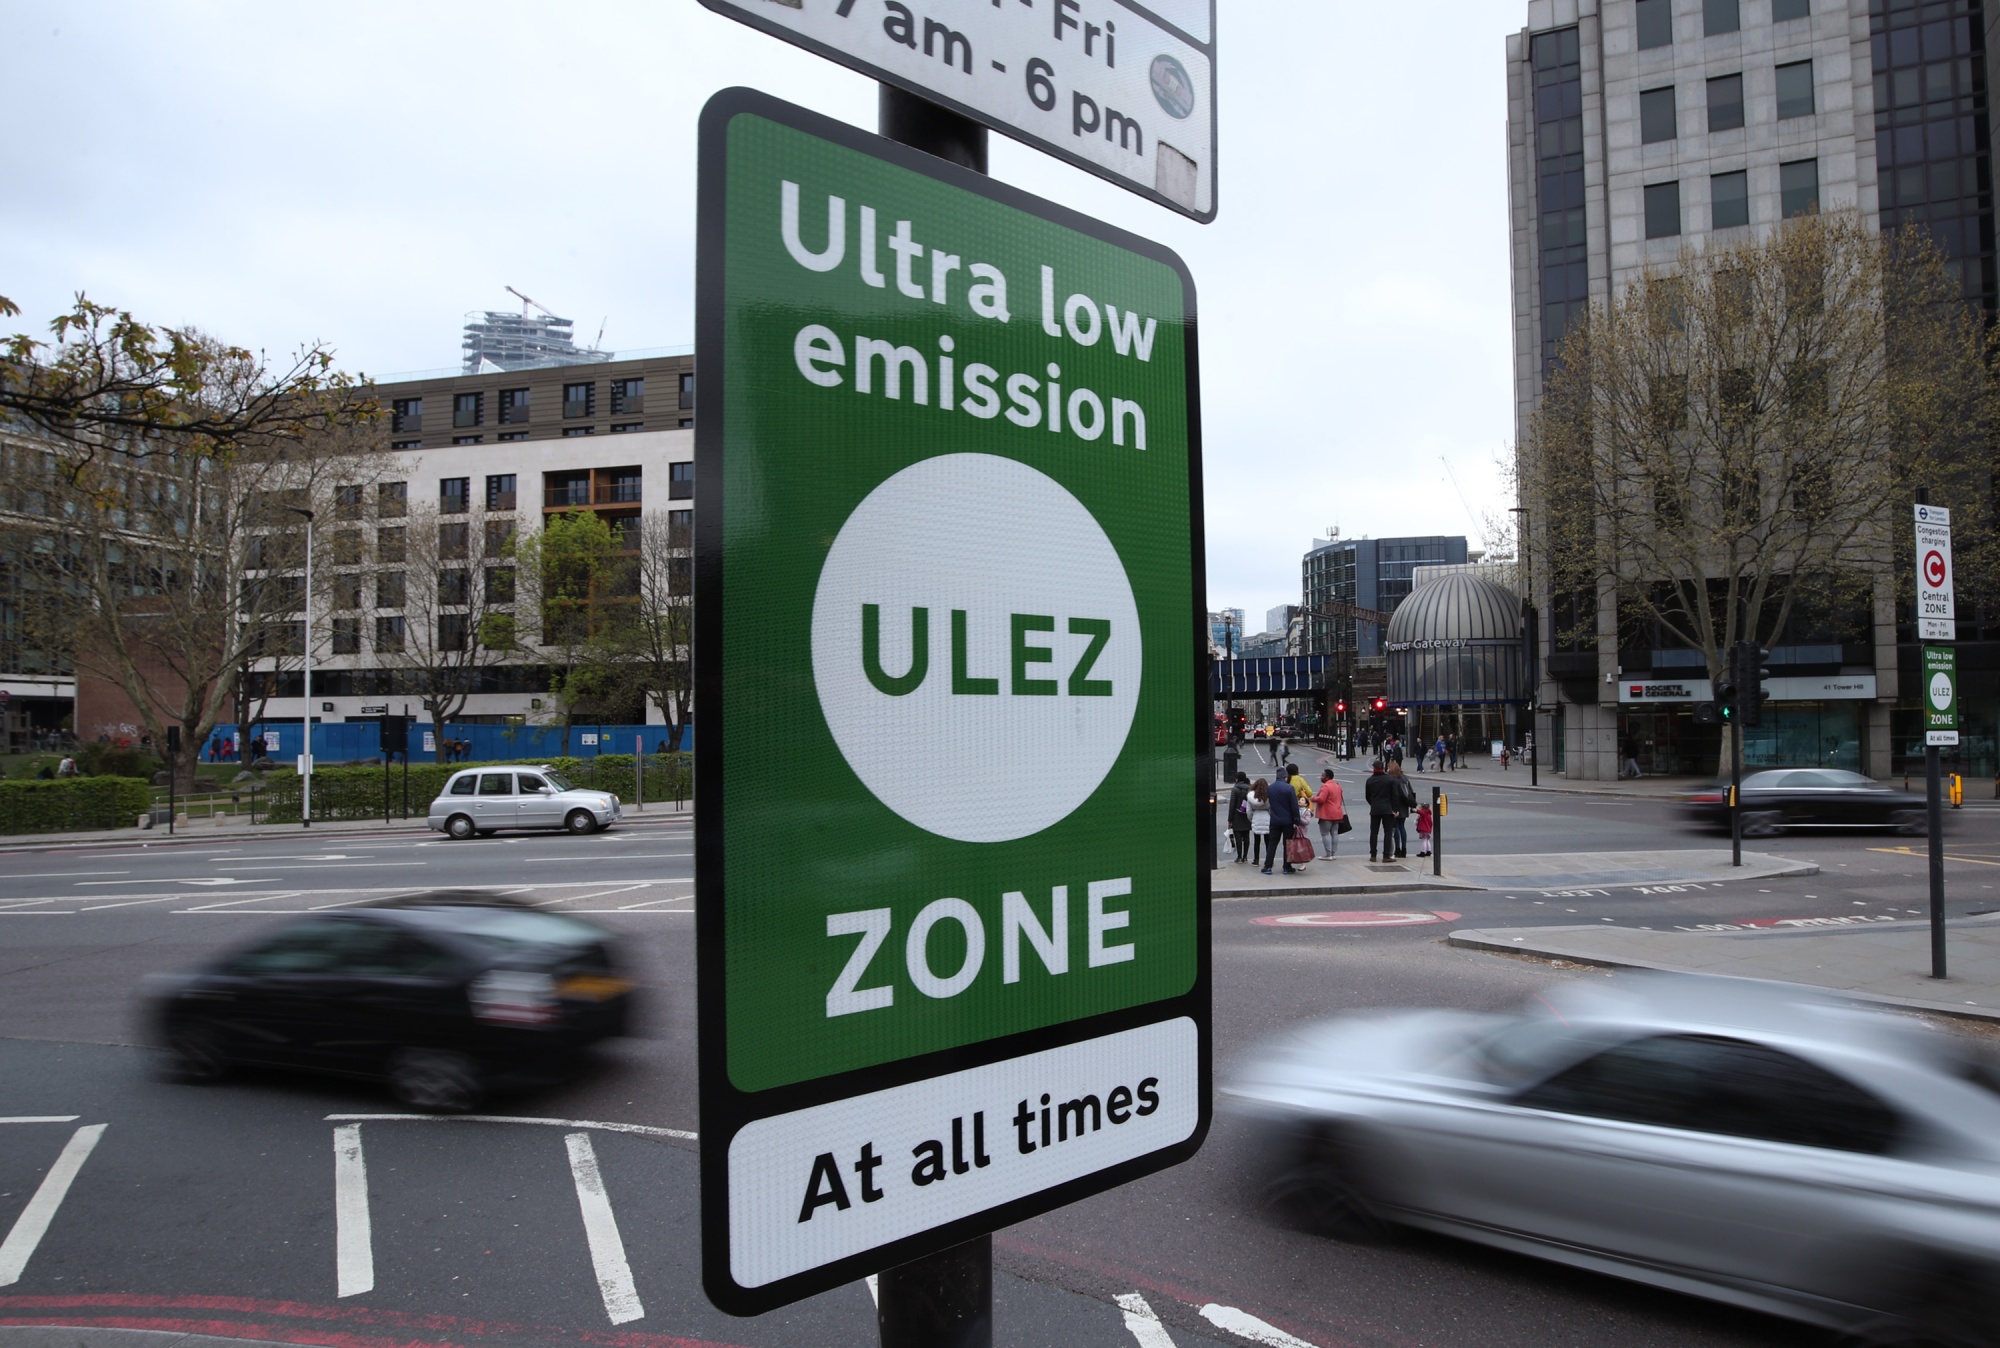 Expanding London's Ultra-Low Emission Zone Boosted Tfl's Income by Almost £100m - Bloomberg